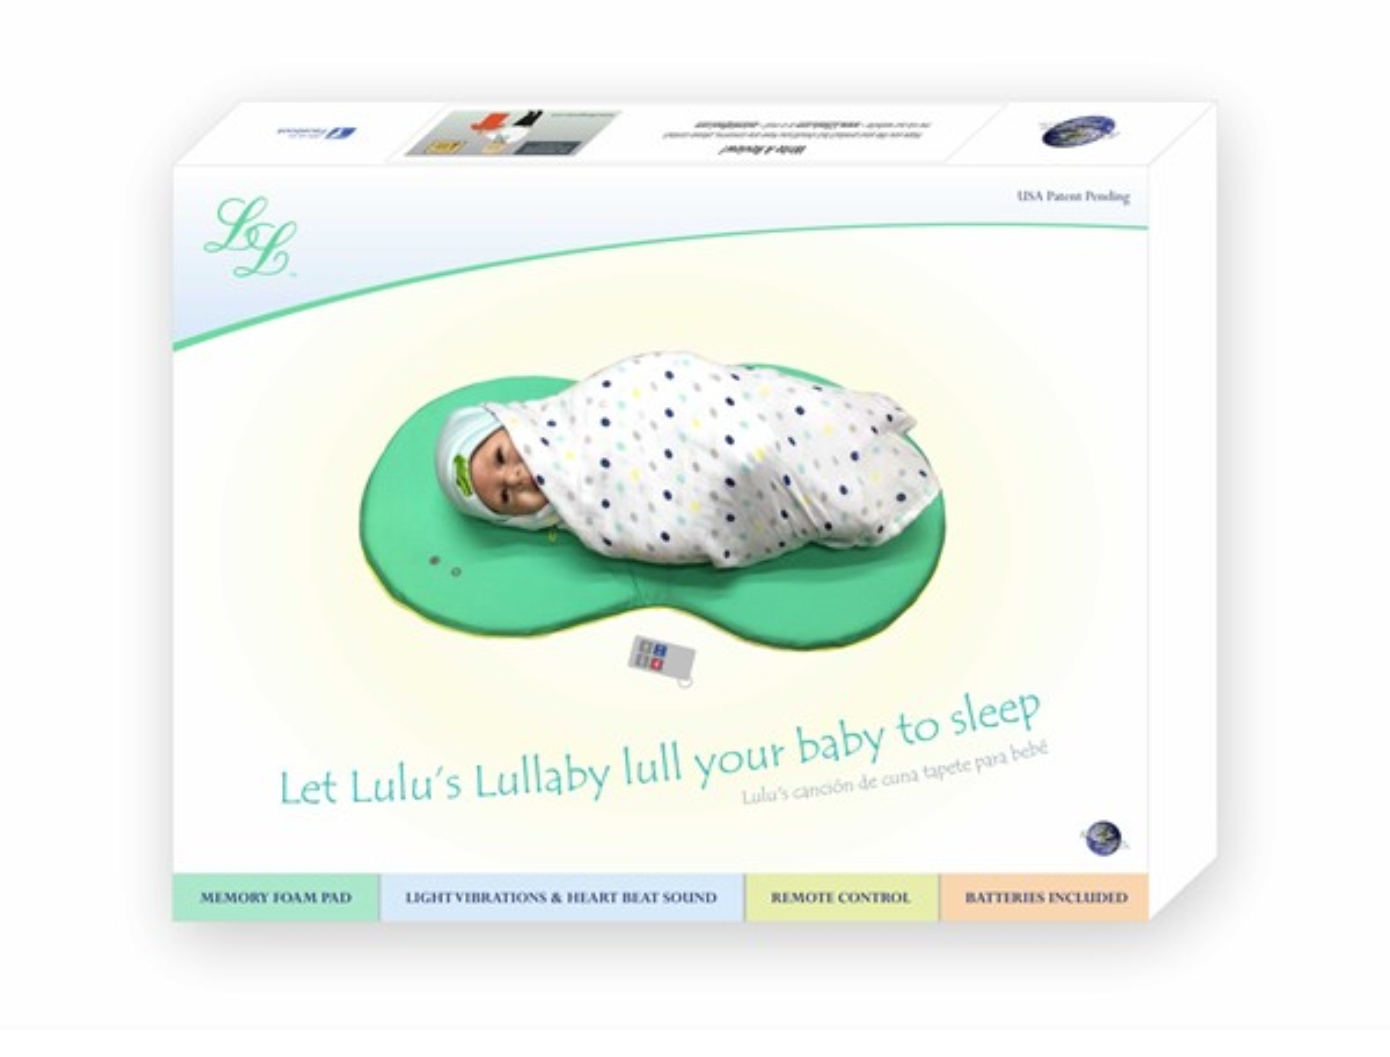 Lullulaby Package